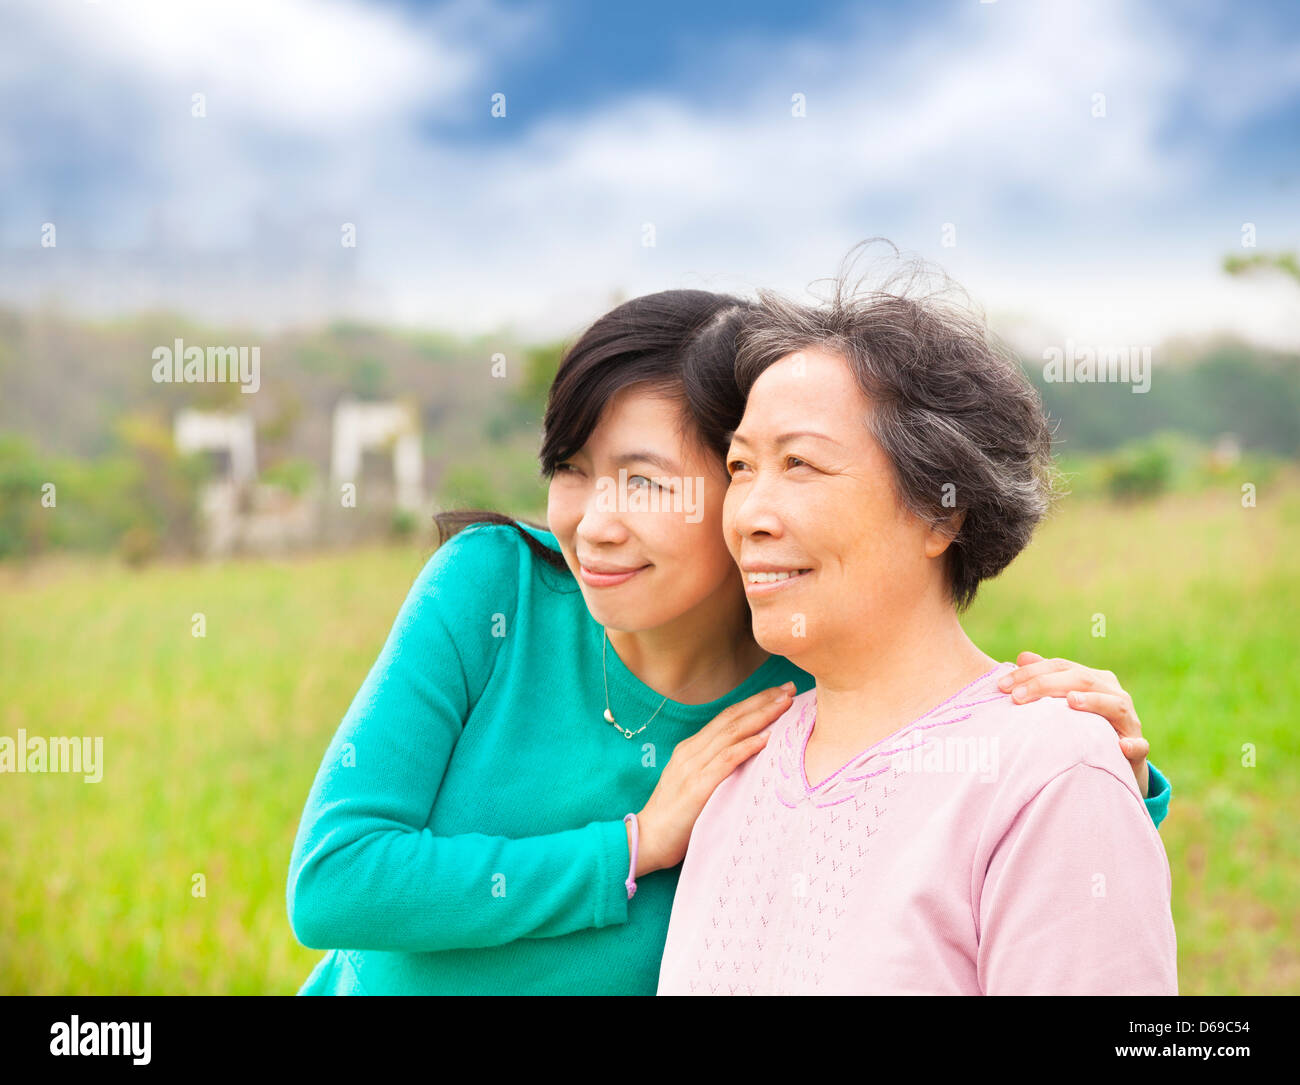 happy young woman with her mother Stock Photo